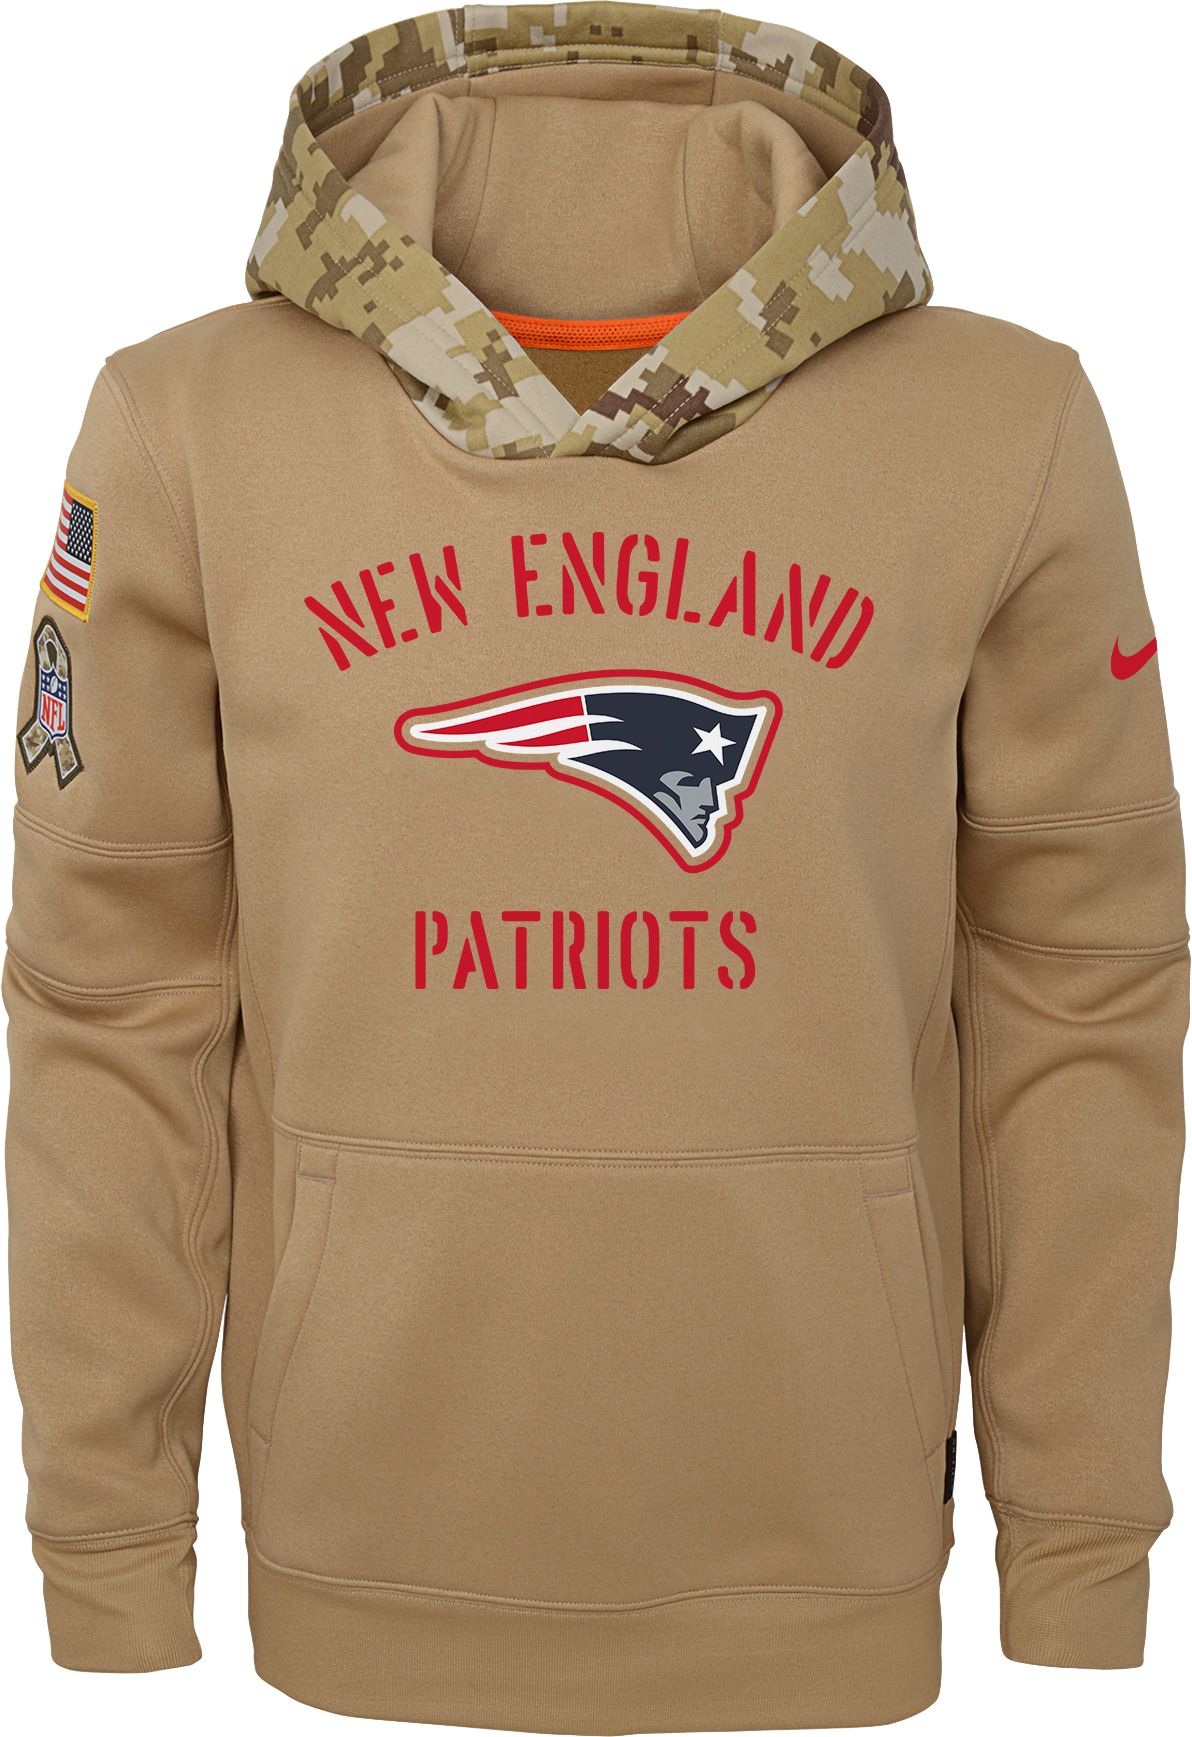 nfl armed forces gear